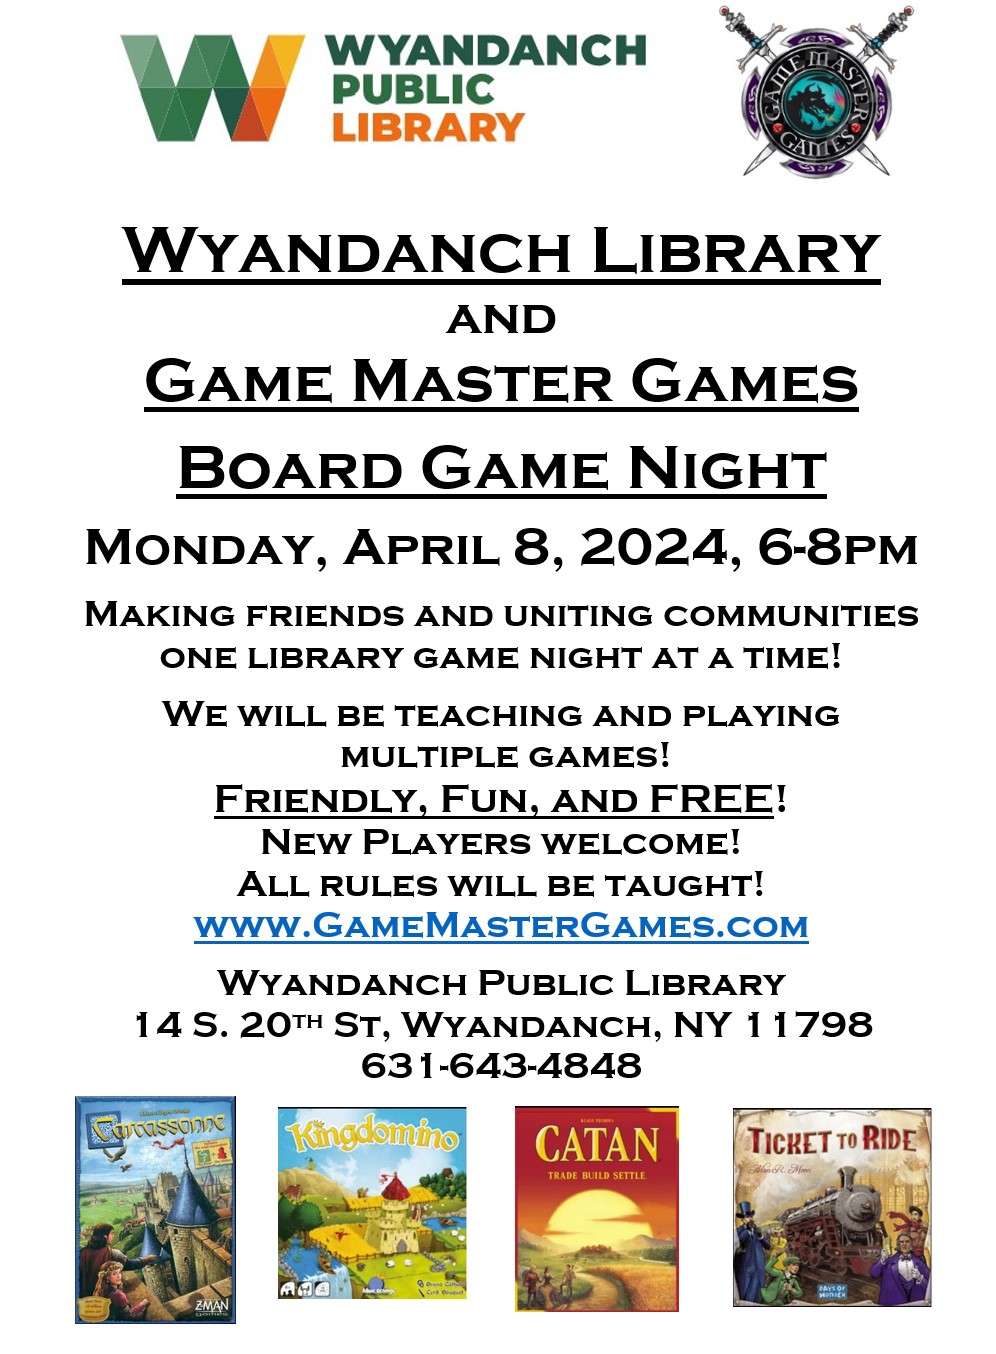 Have fun and make some new friends! Board Game Night at the Wyandanch Library!